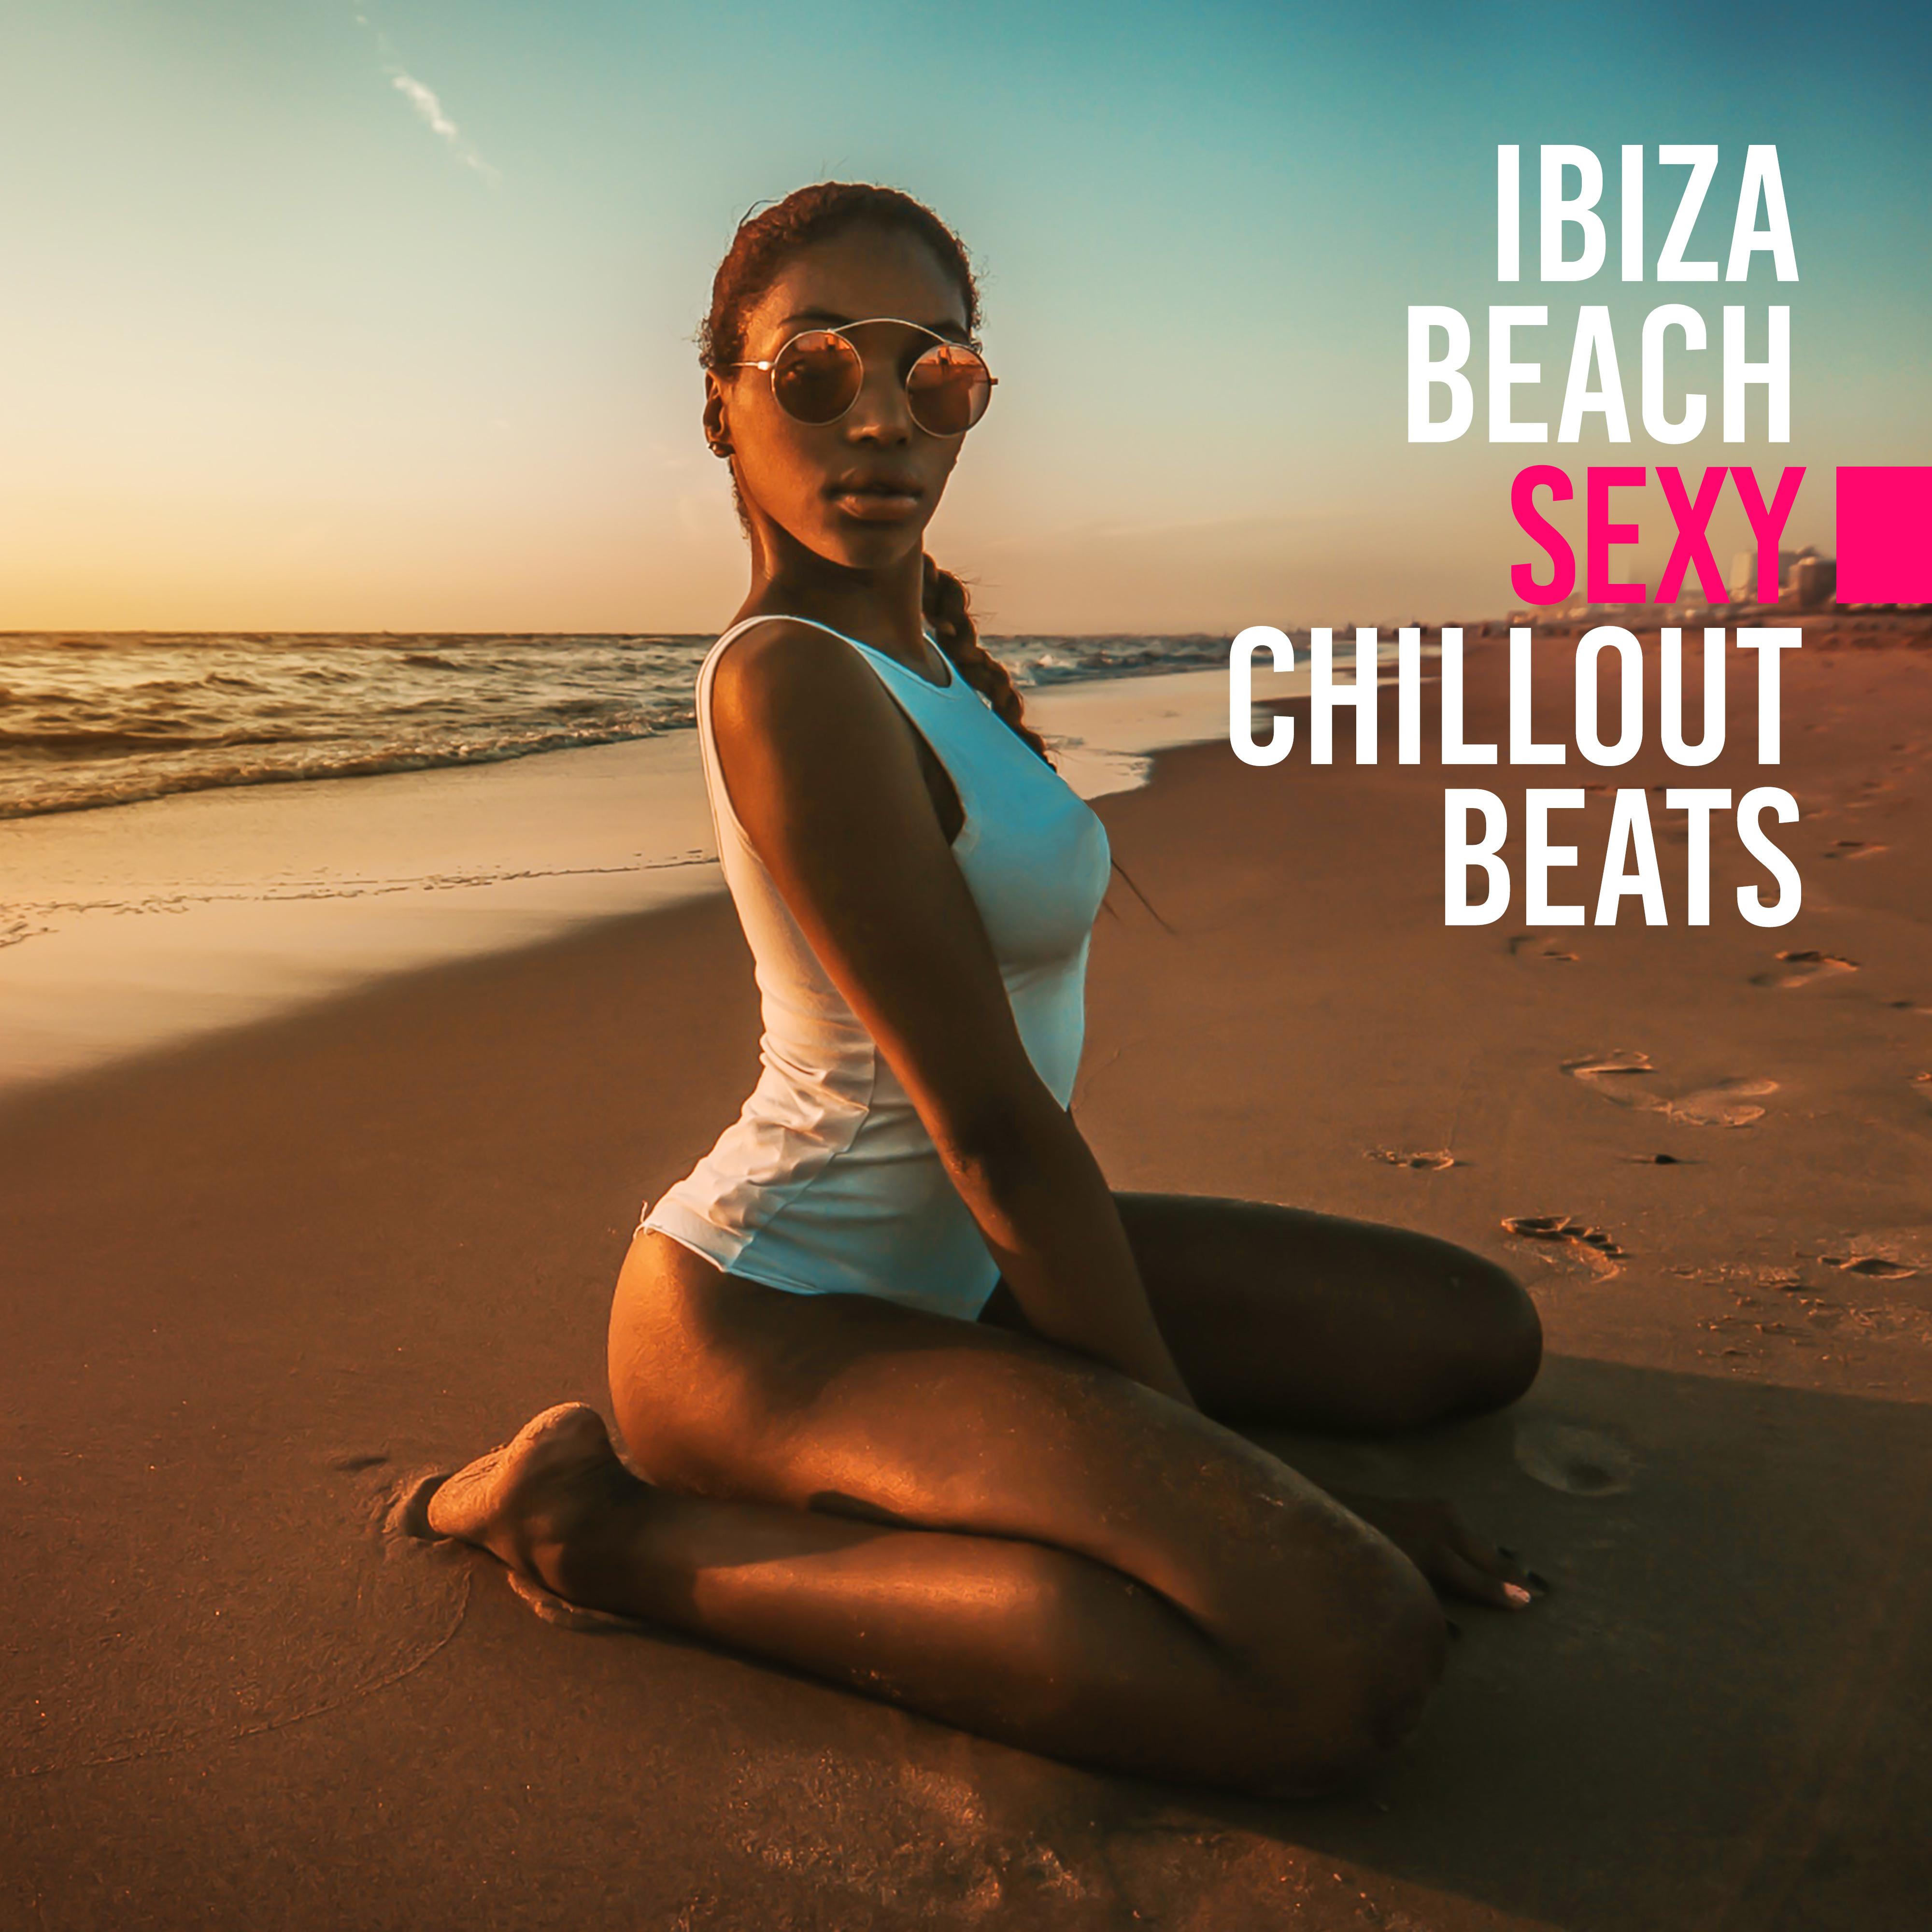 Ibiza Beach **** Chillout Beats: Top Vacation Chill Out Music 2019, Holiday Relaxation Vibes, Songs for Good Mood, Tropical Vacation Sounds